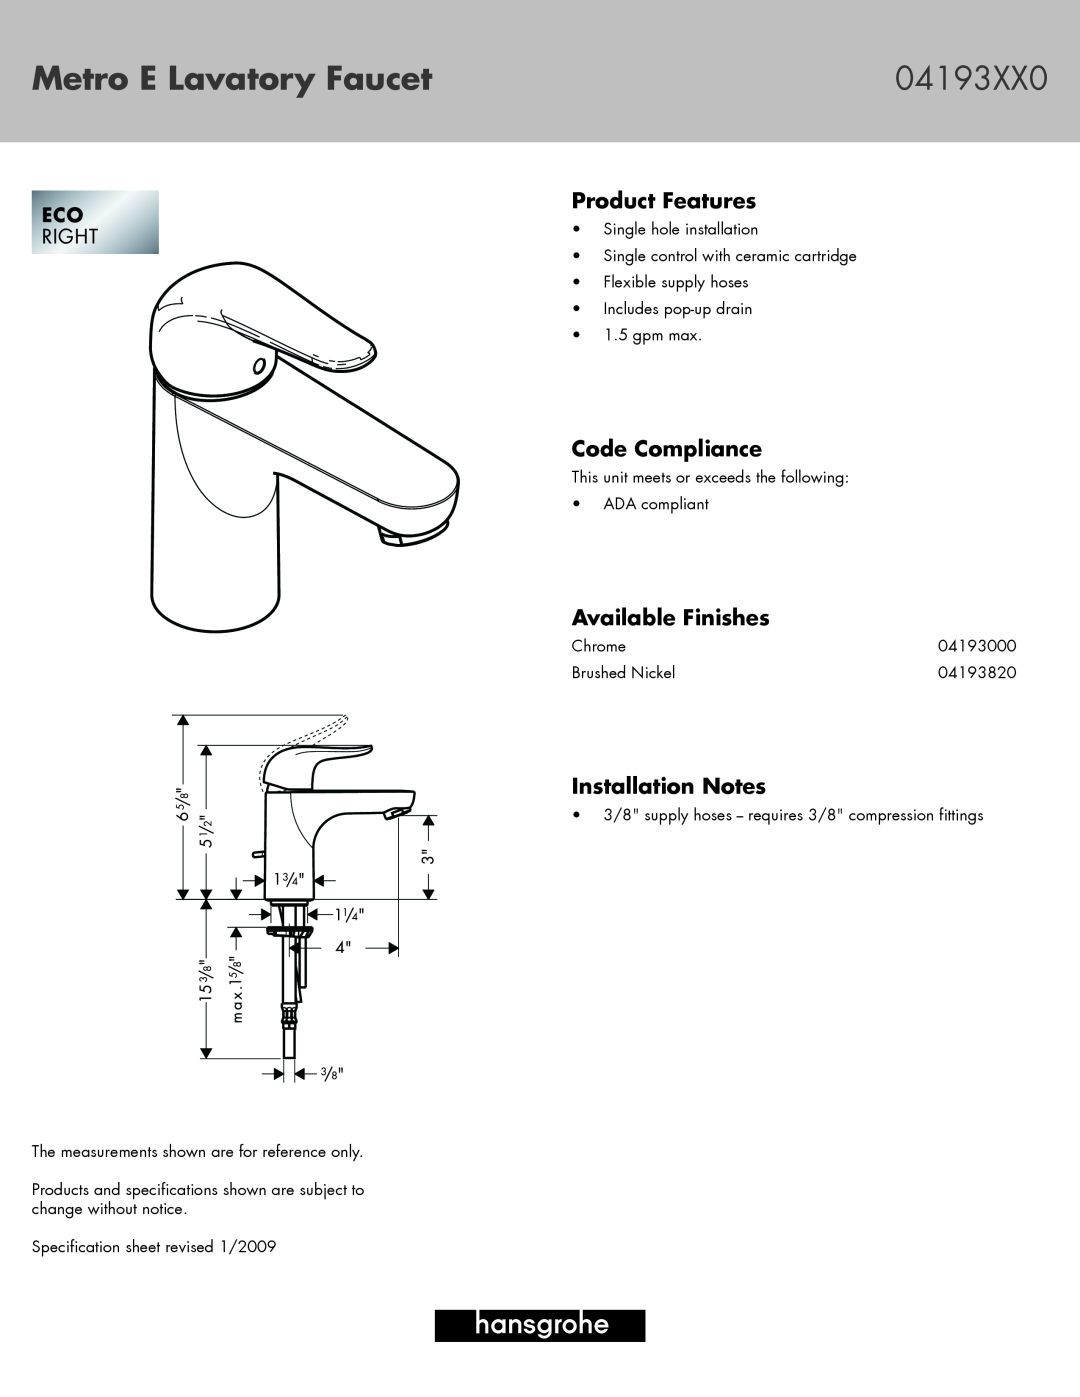 Hans Grohe 04193820, 04193000 specifications Metro E Lavatory Faucet, 04193XX0, Product Features, Code Compliance 